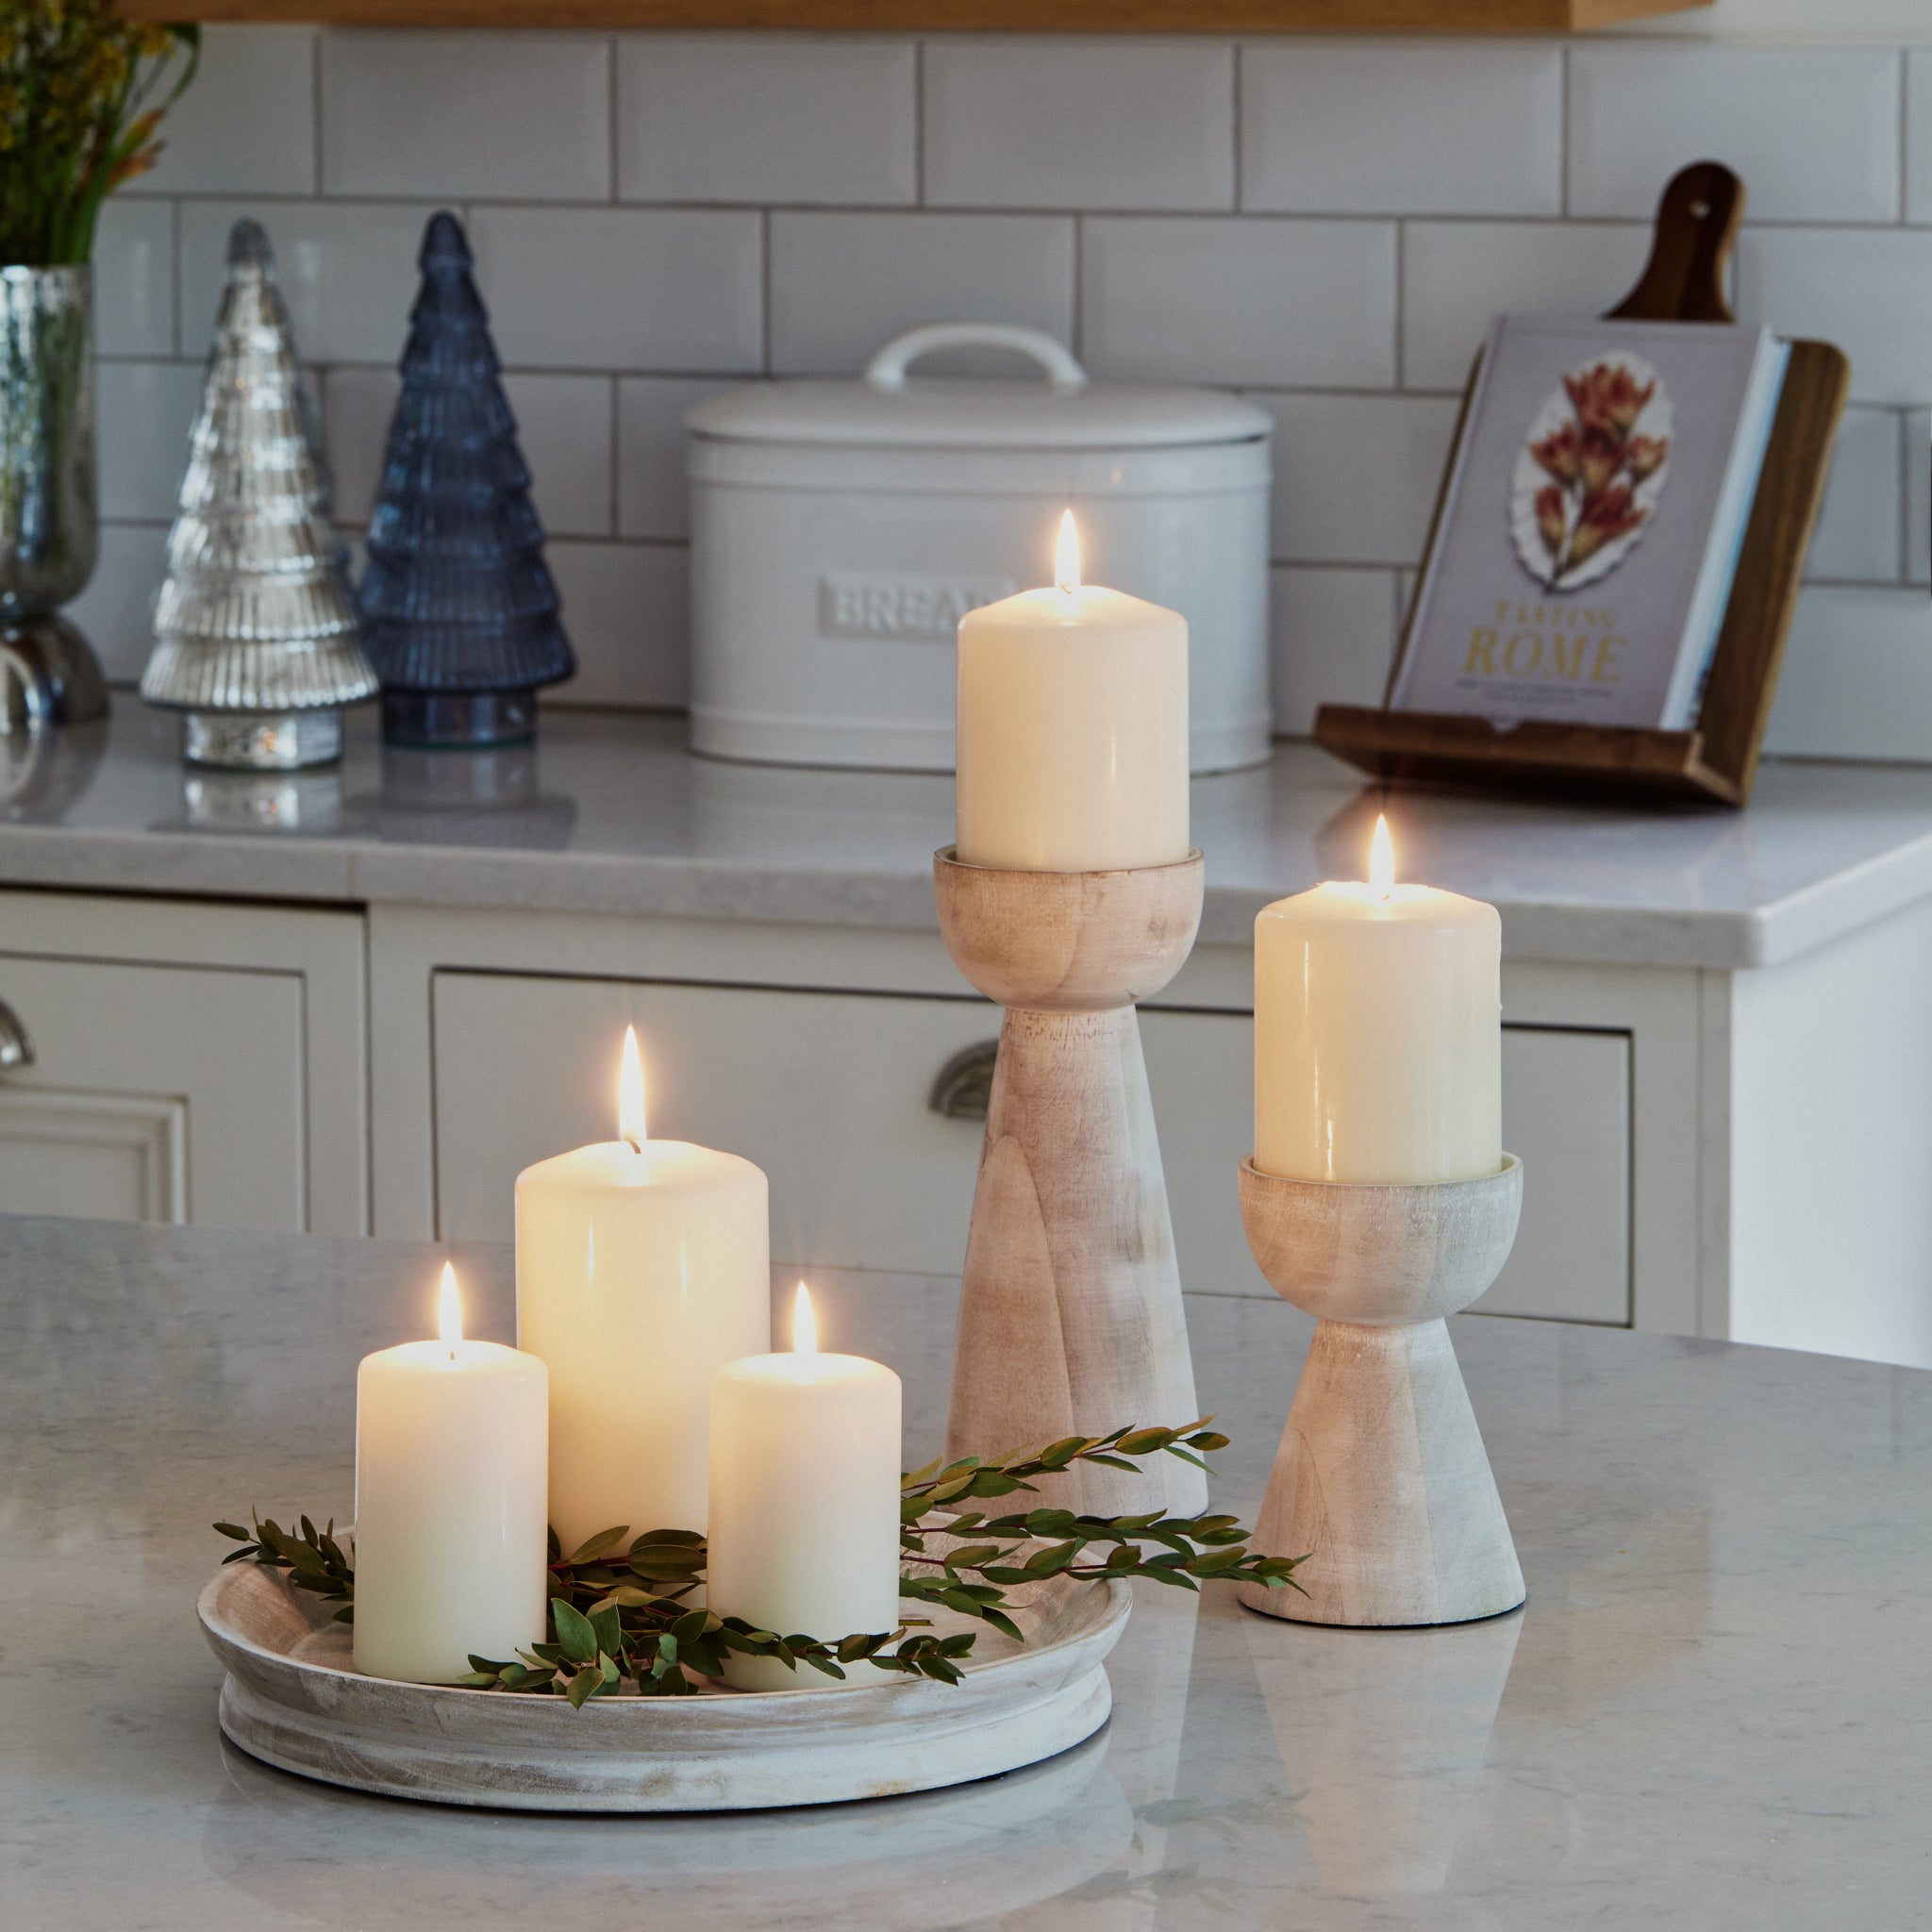 Padstow White Wash Wooden Candle Holders Set of 2